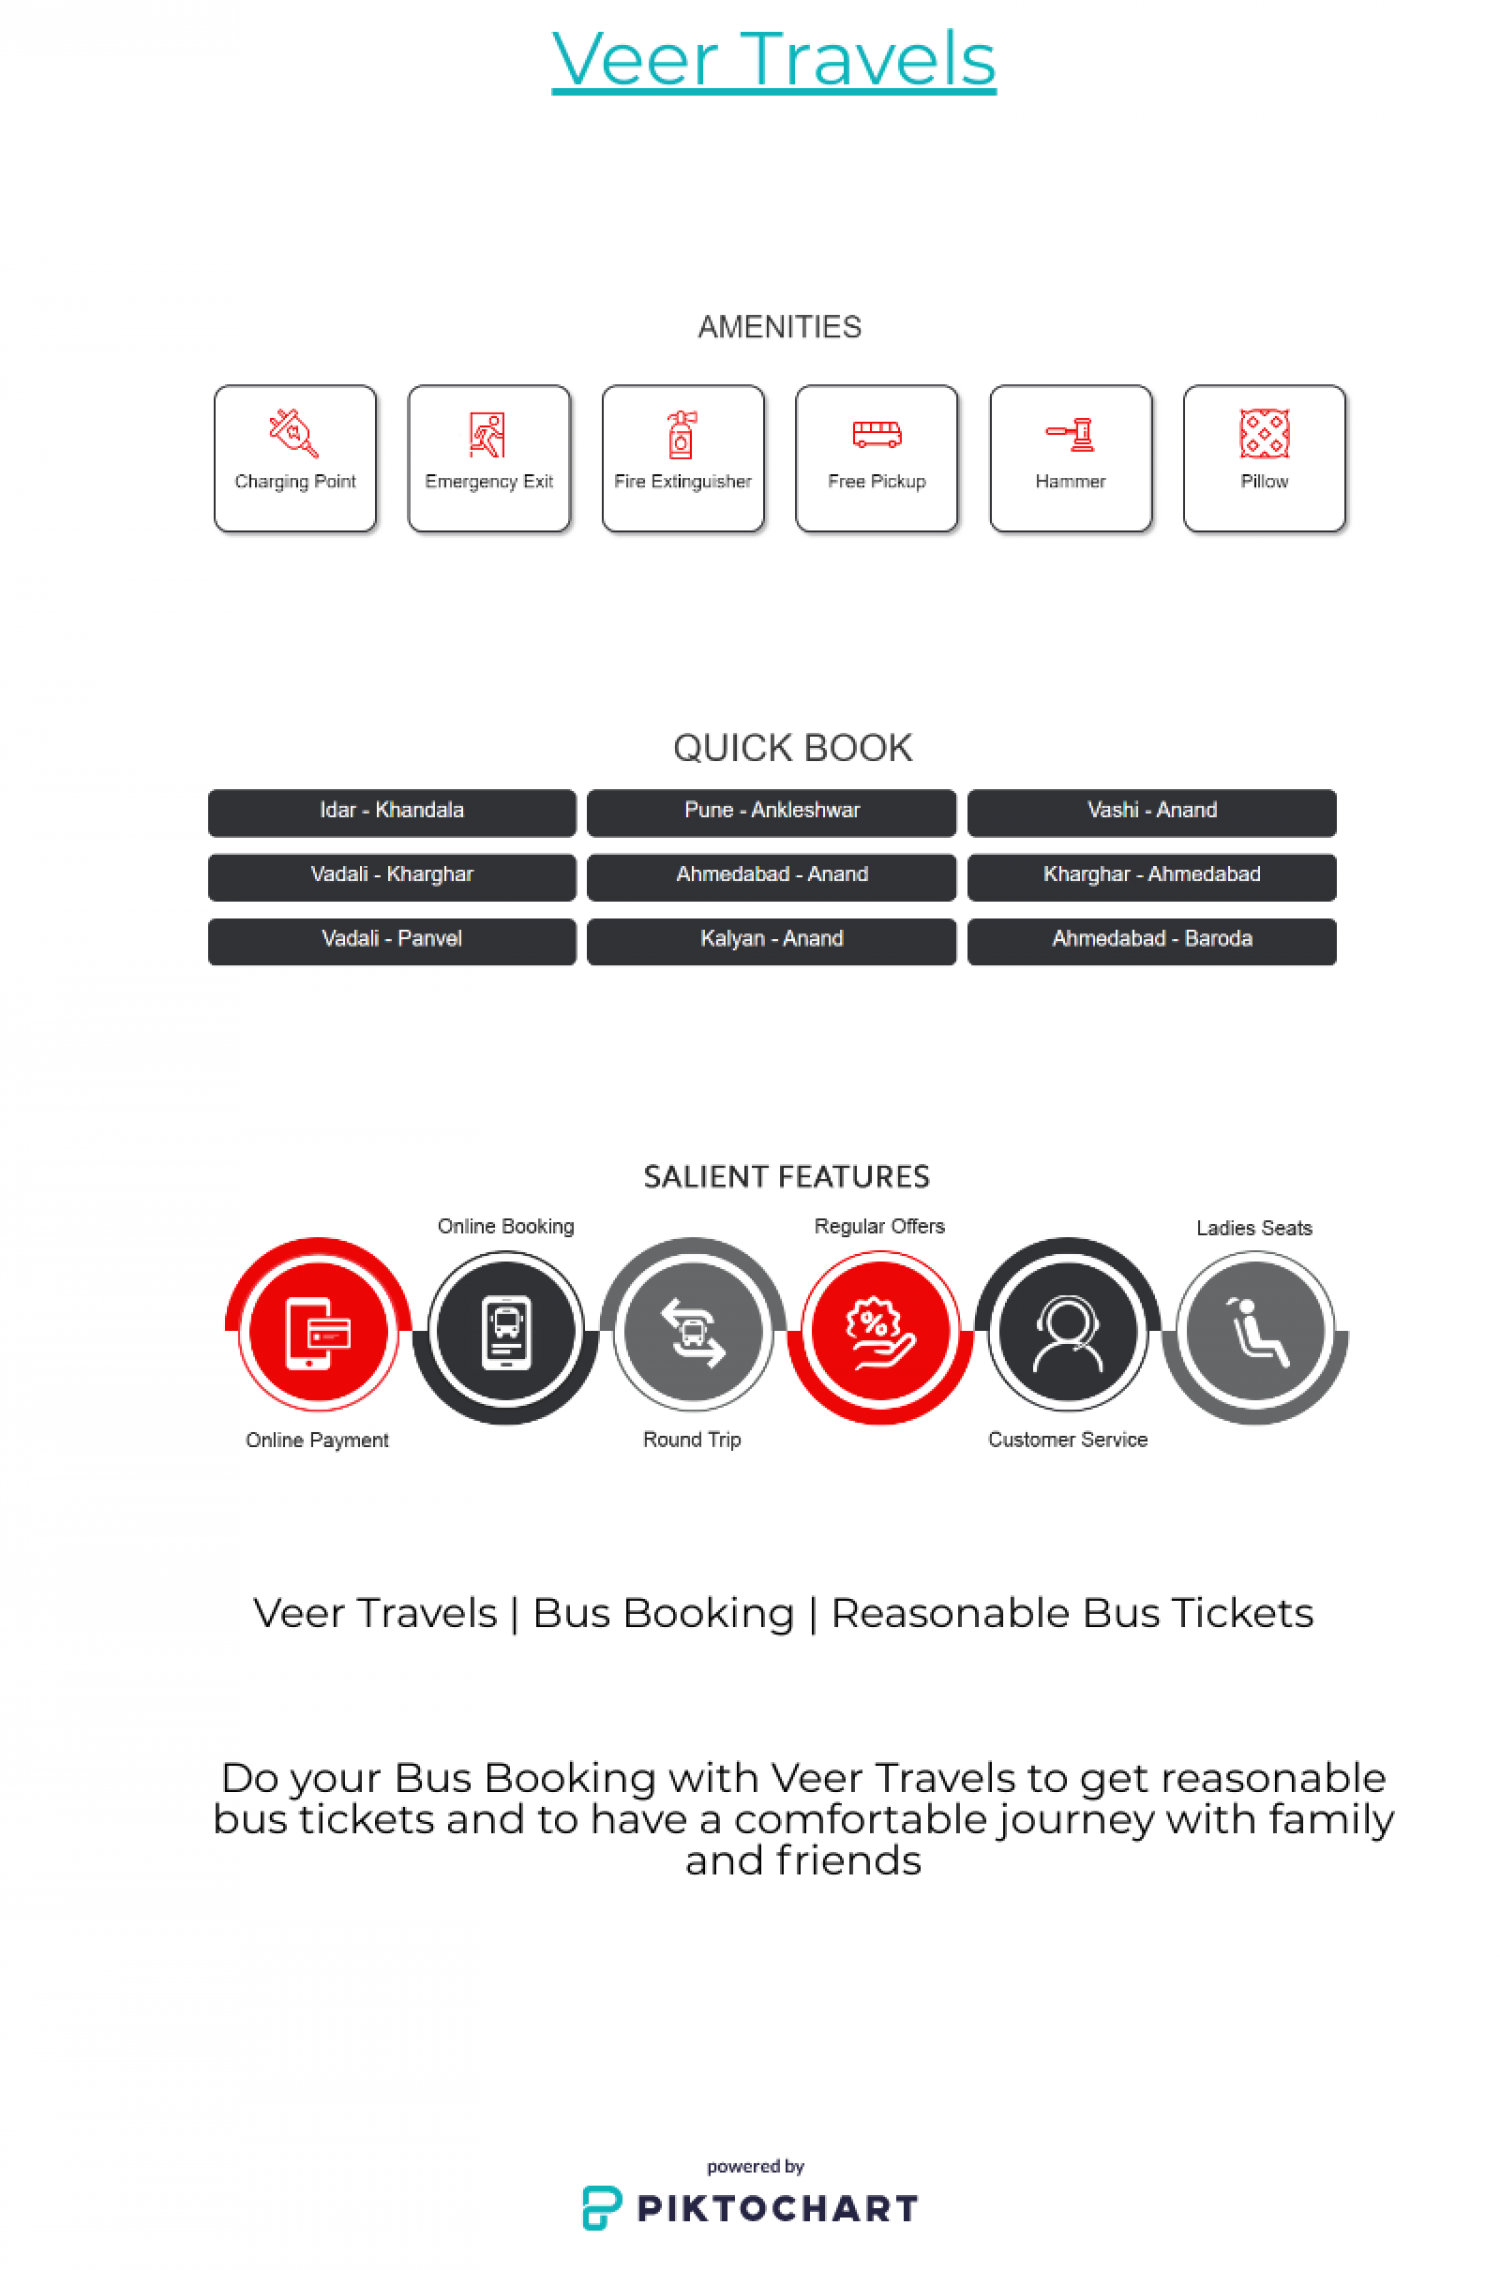 Veer Travels | Bus Booking | Reasonable Bus Tickets Infographic